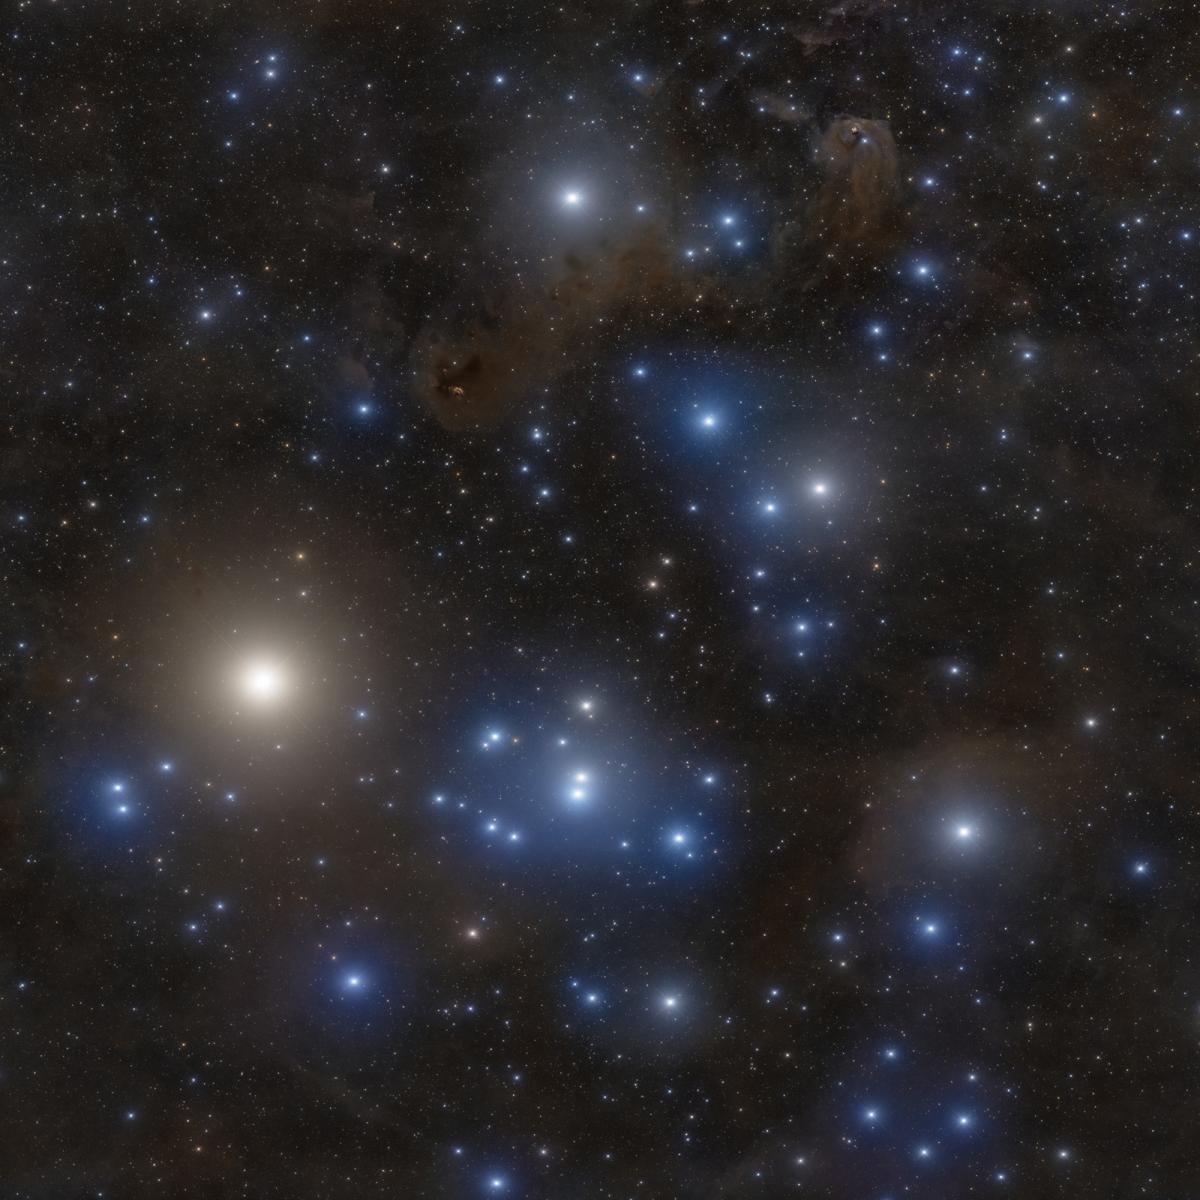 Image showing the Hyades star cluster which has many prominent glowing blue stars, and one really large white star